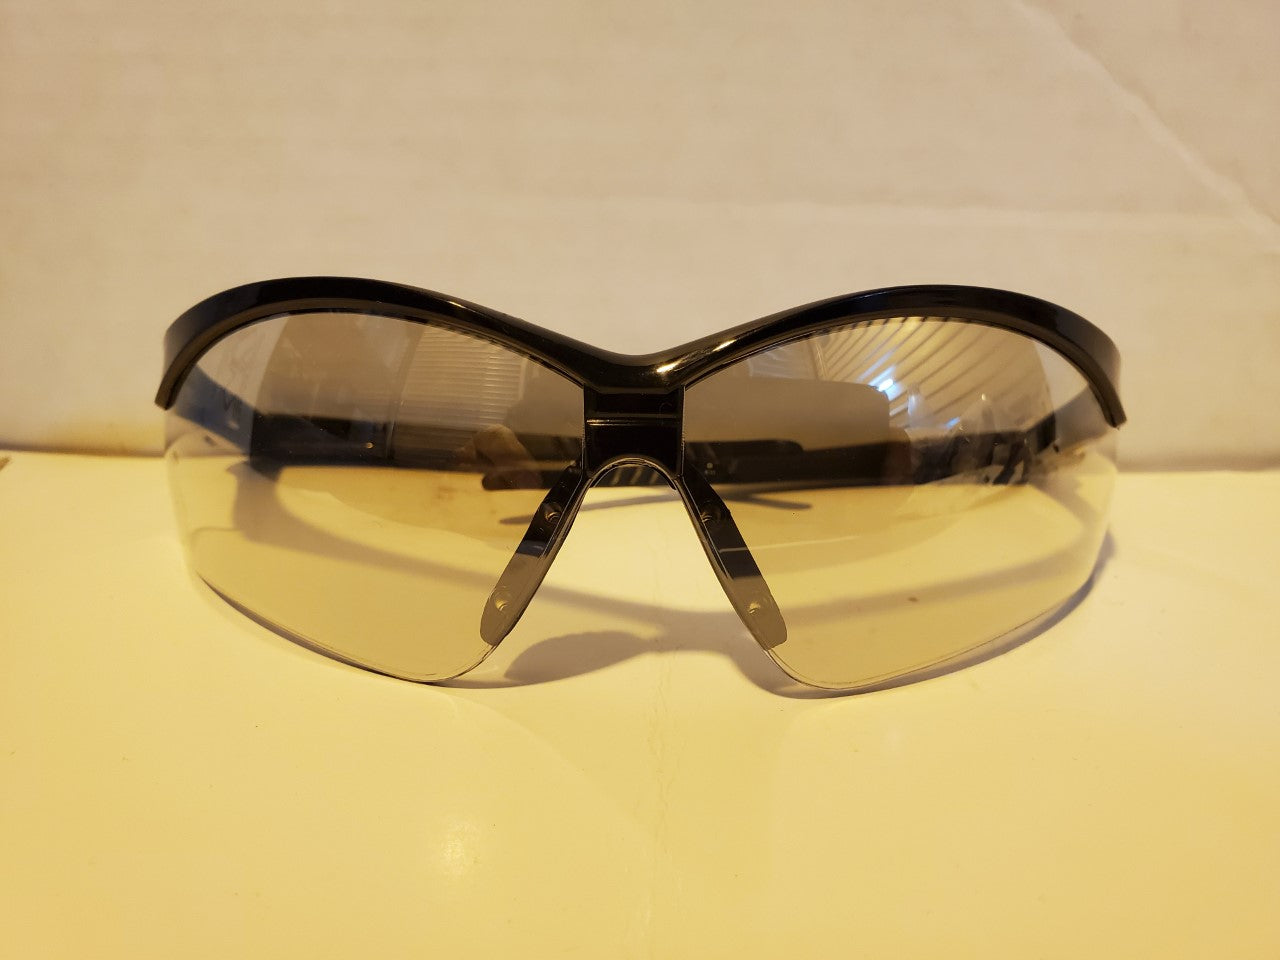 SAFETY GLASSES INDOOR /OUTDOOR LENS